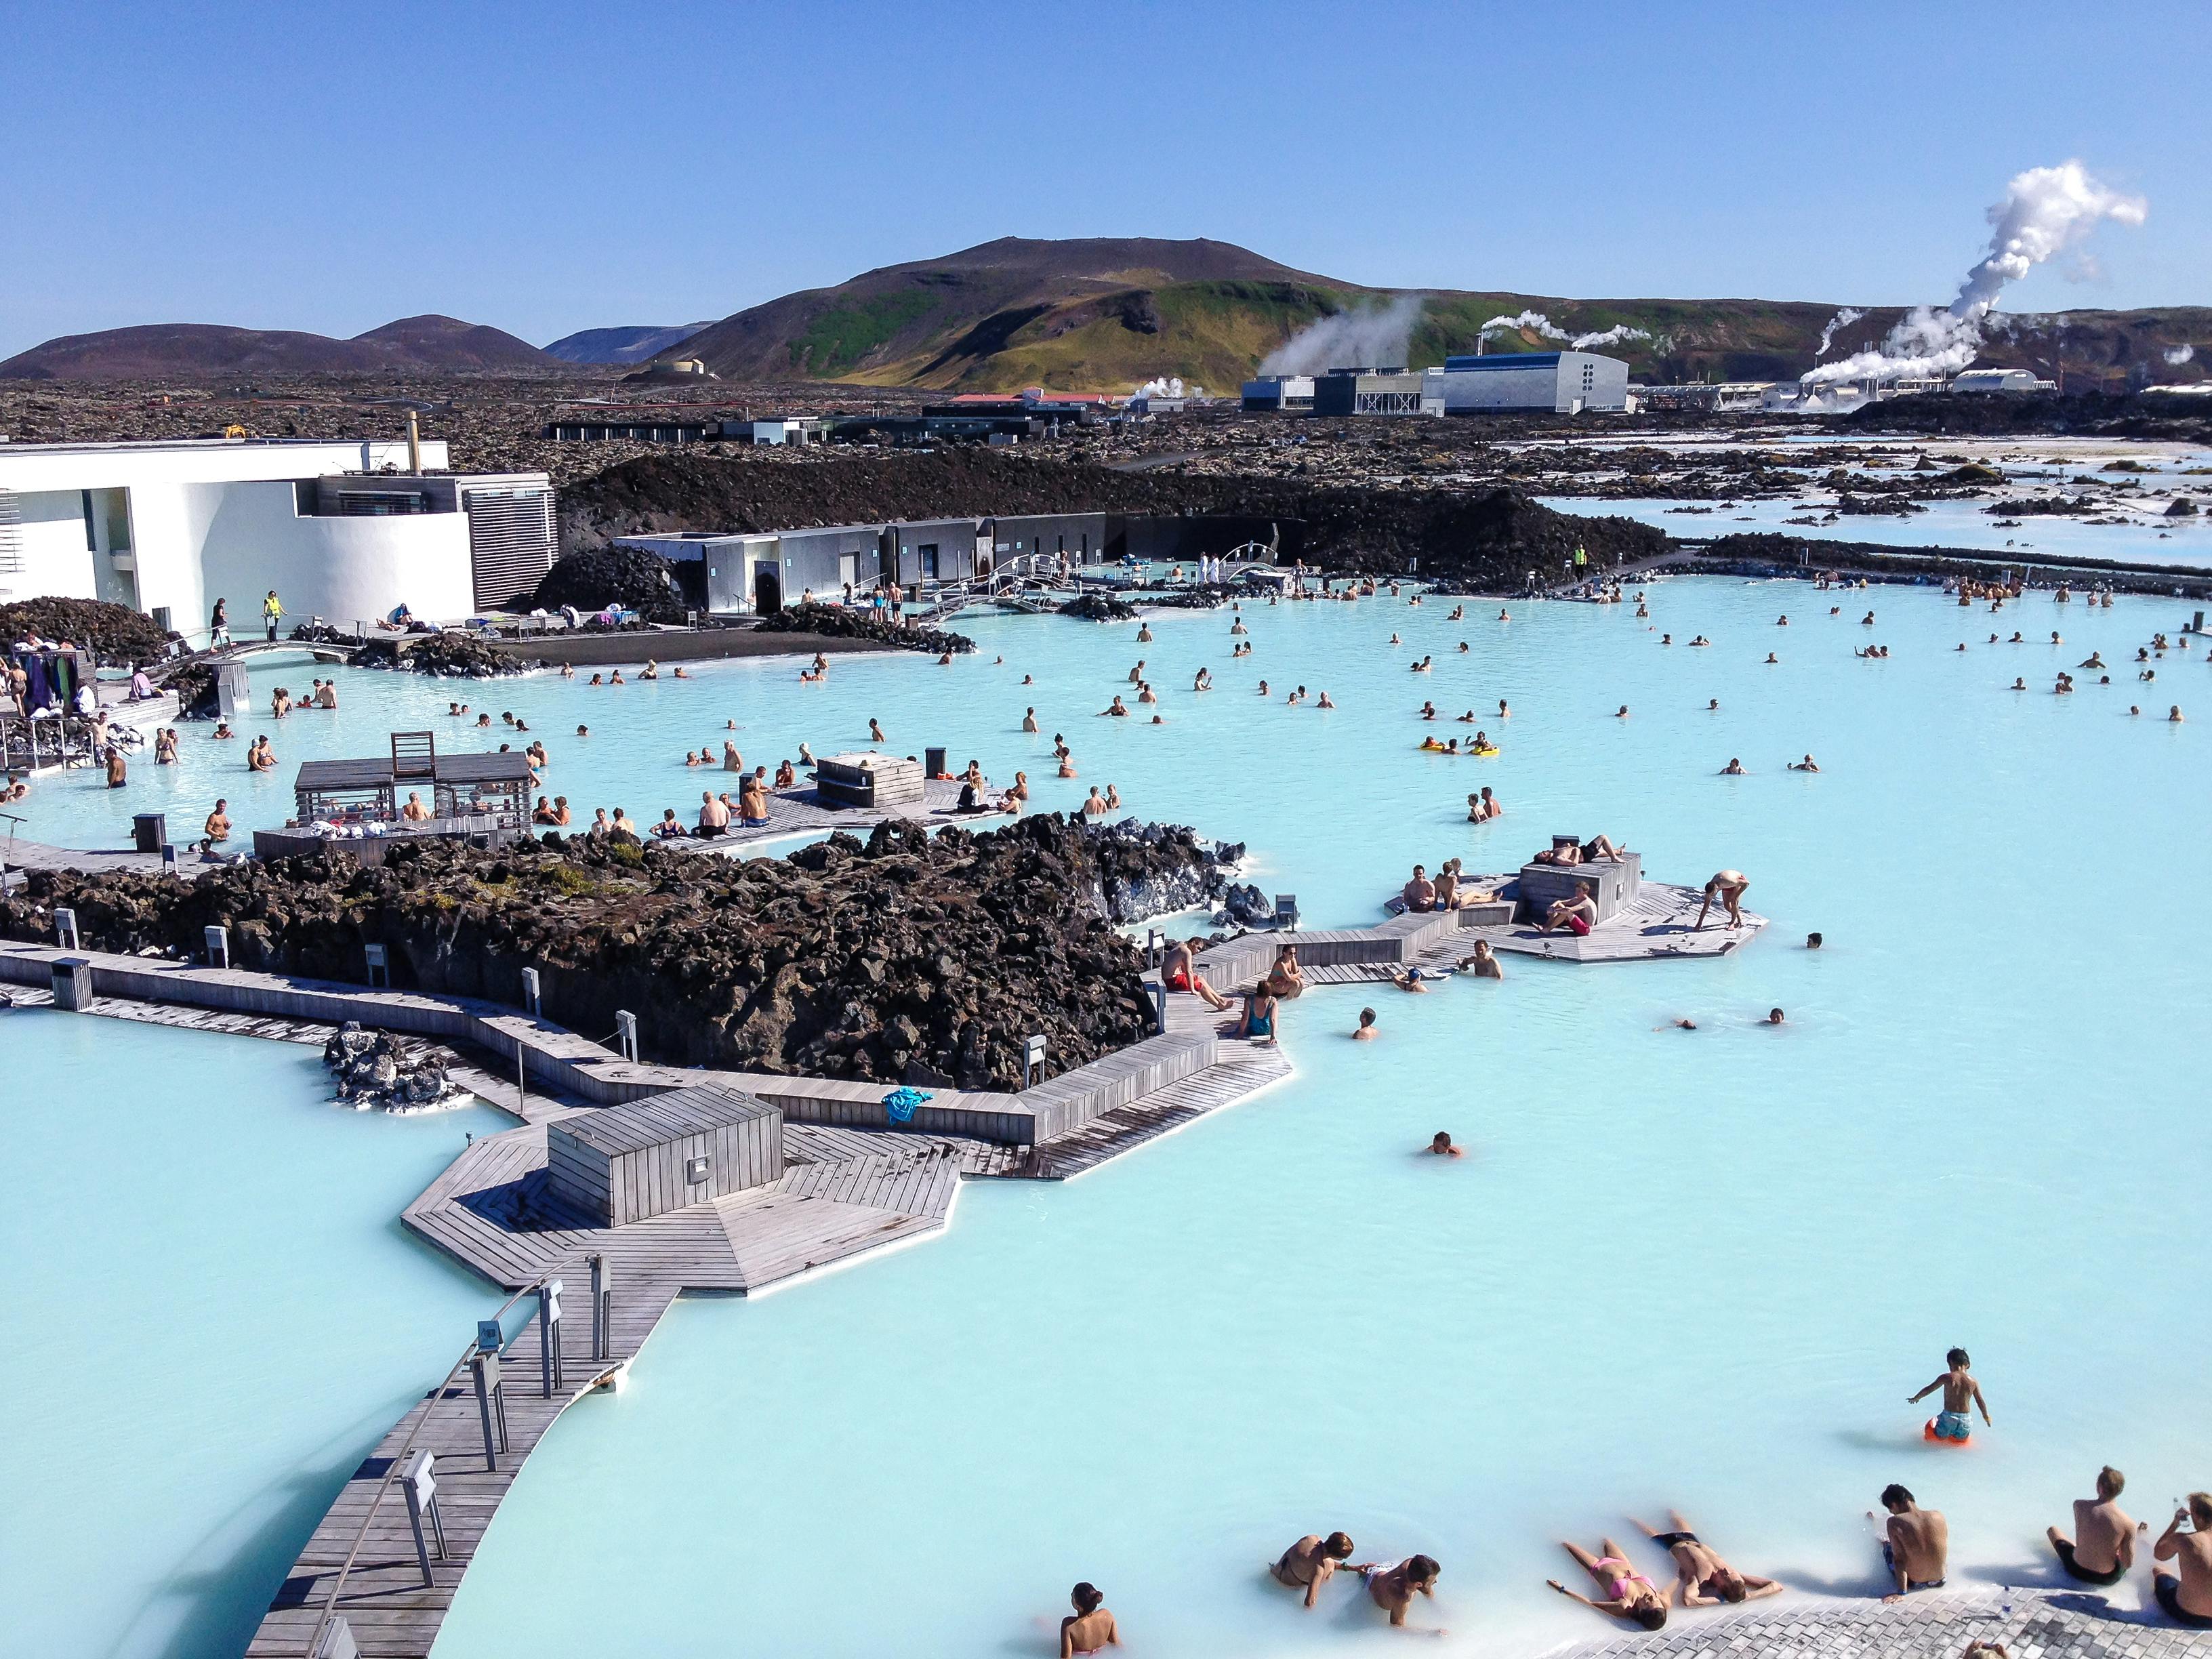 Private Luxury Jeep Transfer from Keflavik Airport to Reykjavik via Blue Lagoon